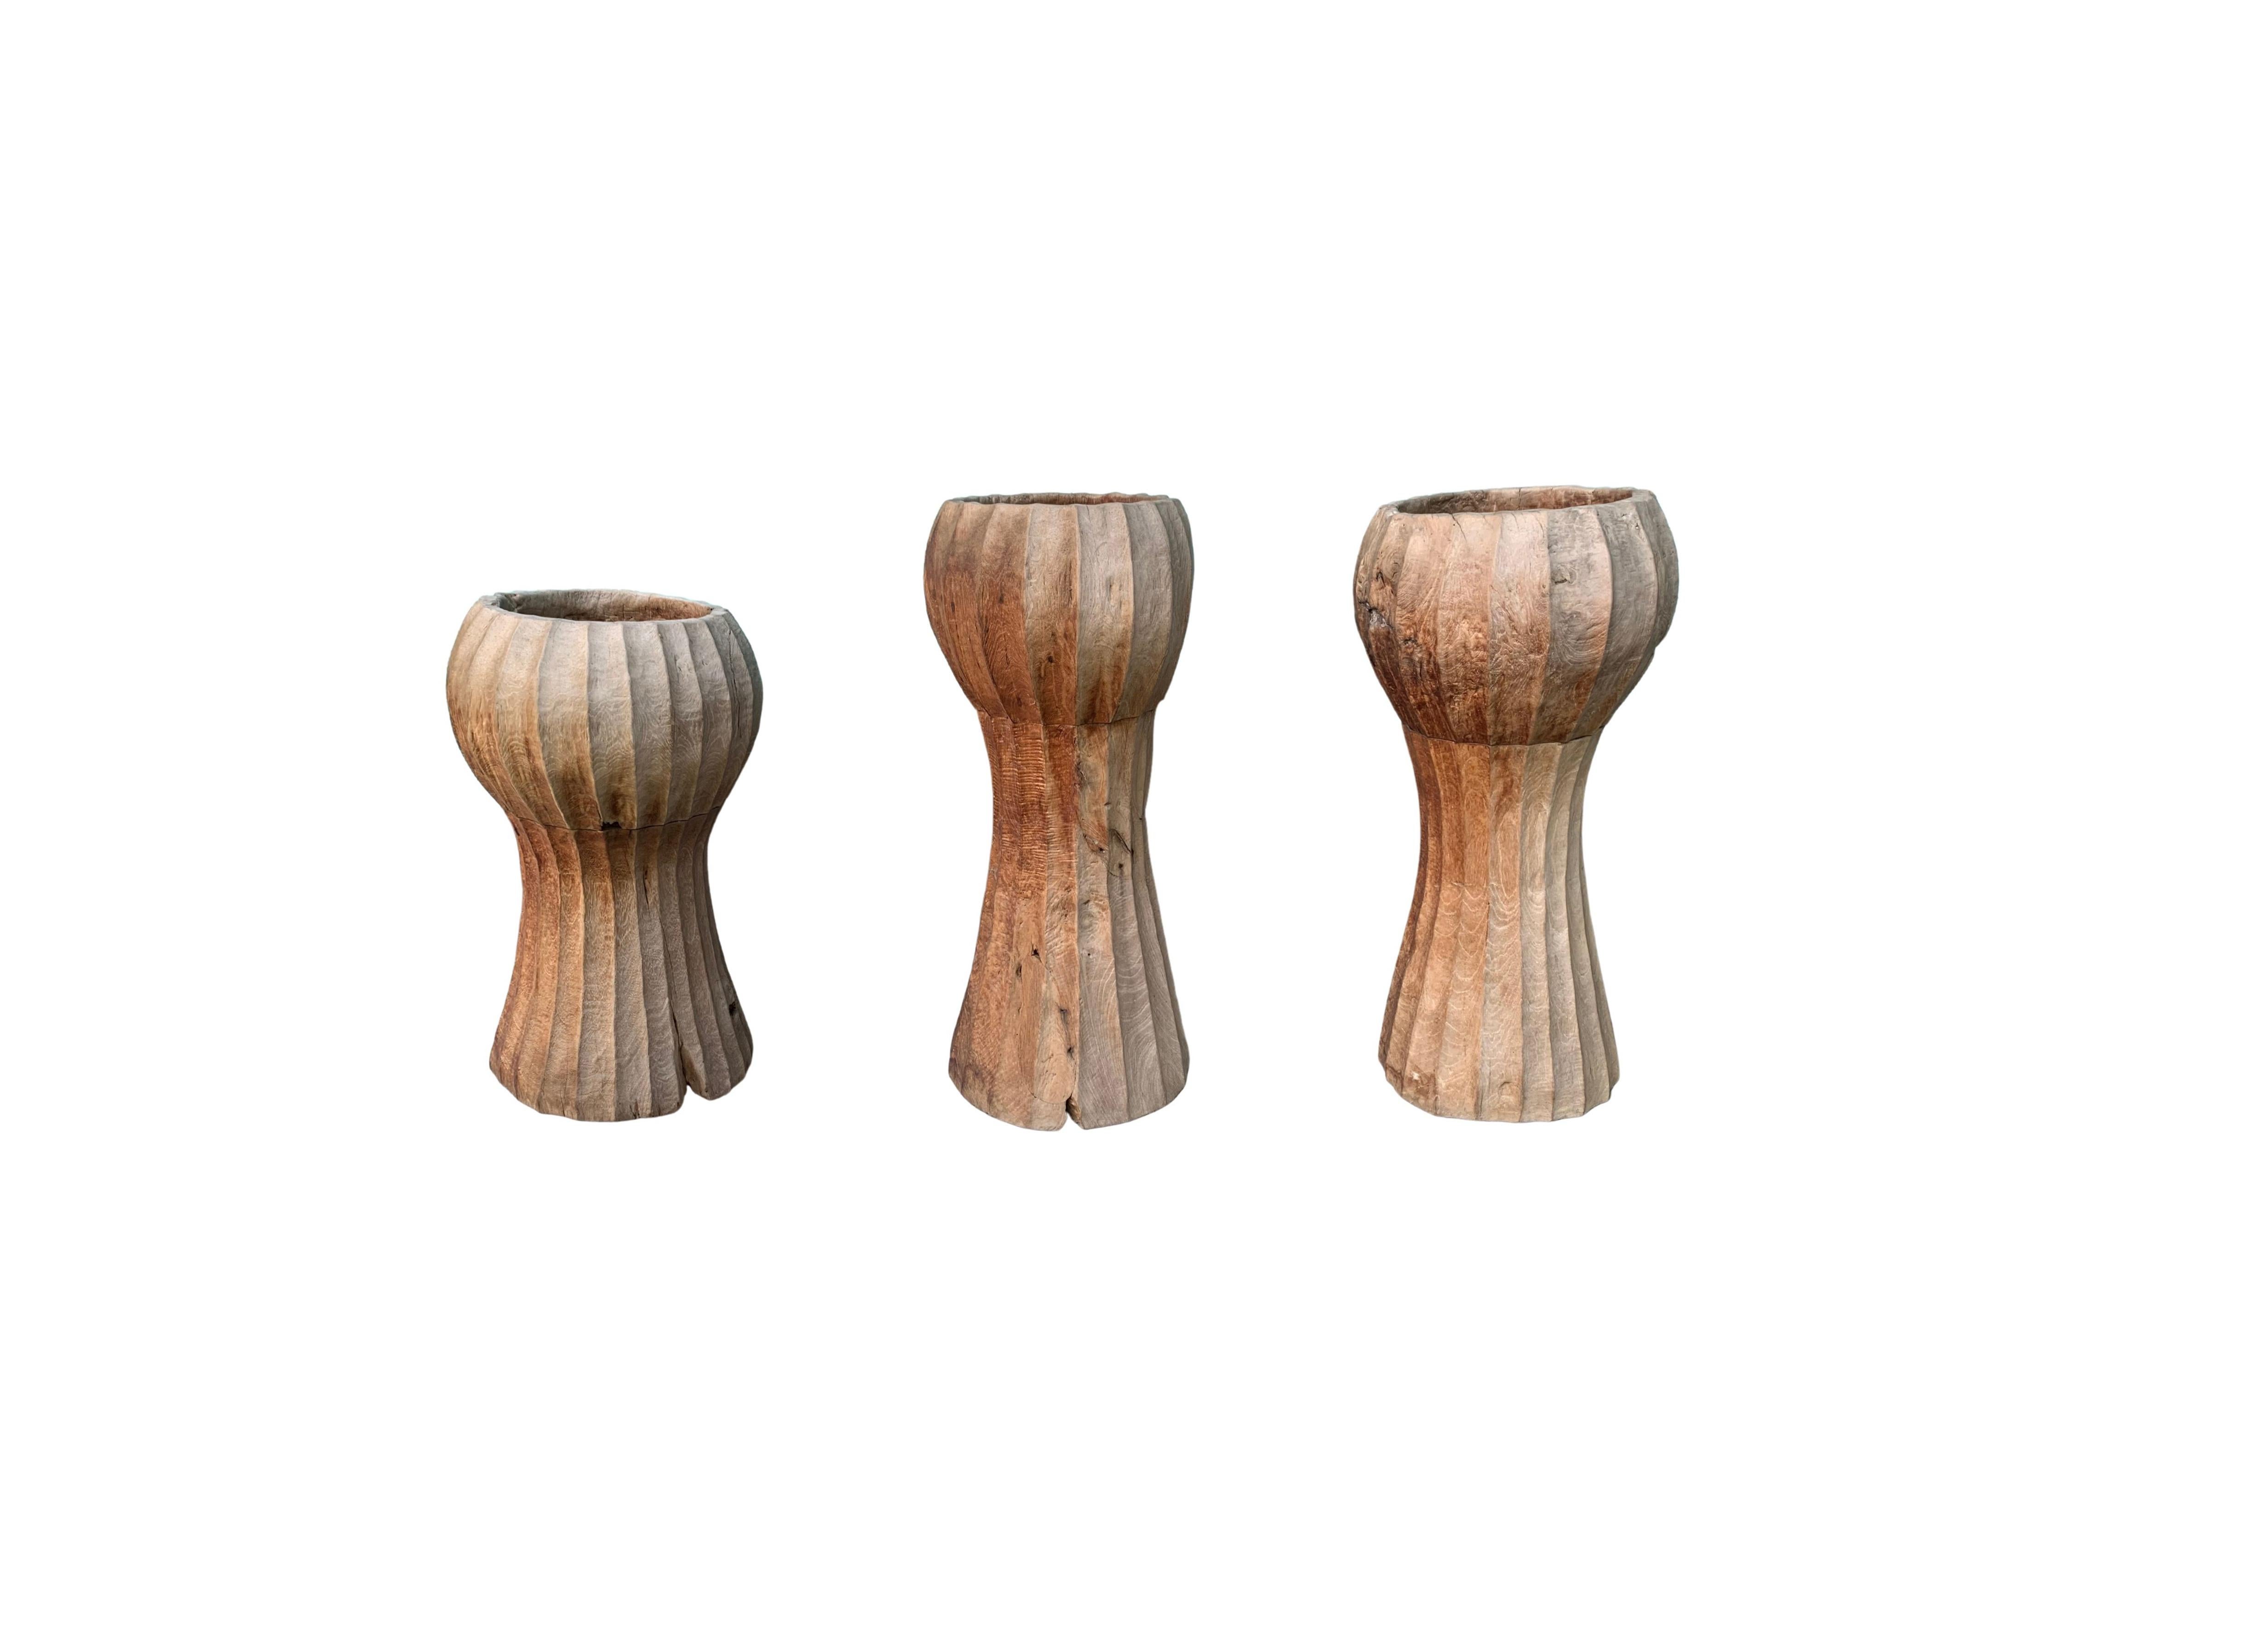 These sculptural display bowls were hand crafted on the island of java from solid teak wood. With their elevated elongated shape they would look great as a collection of decorative bowls or even as planters. A great addition to add warmth and an